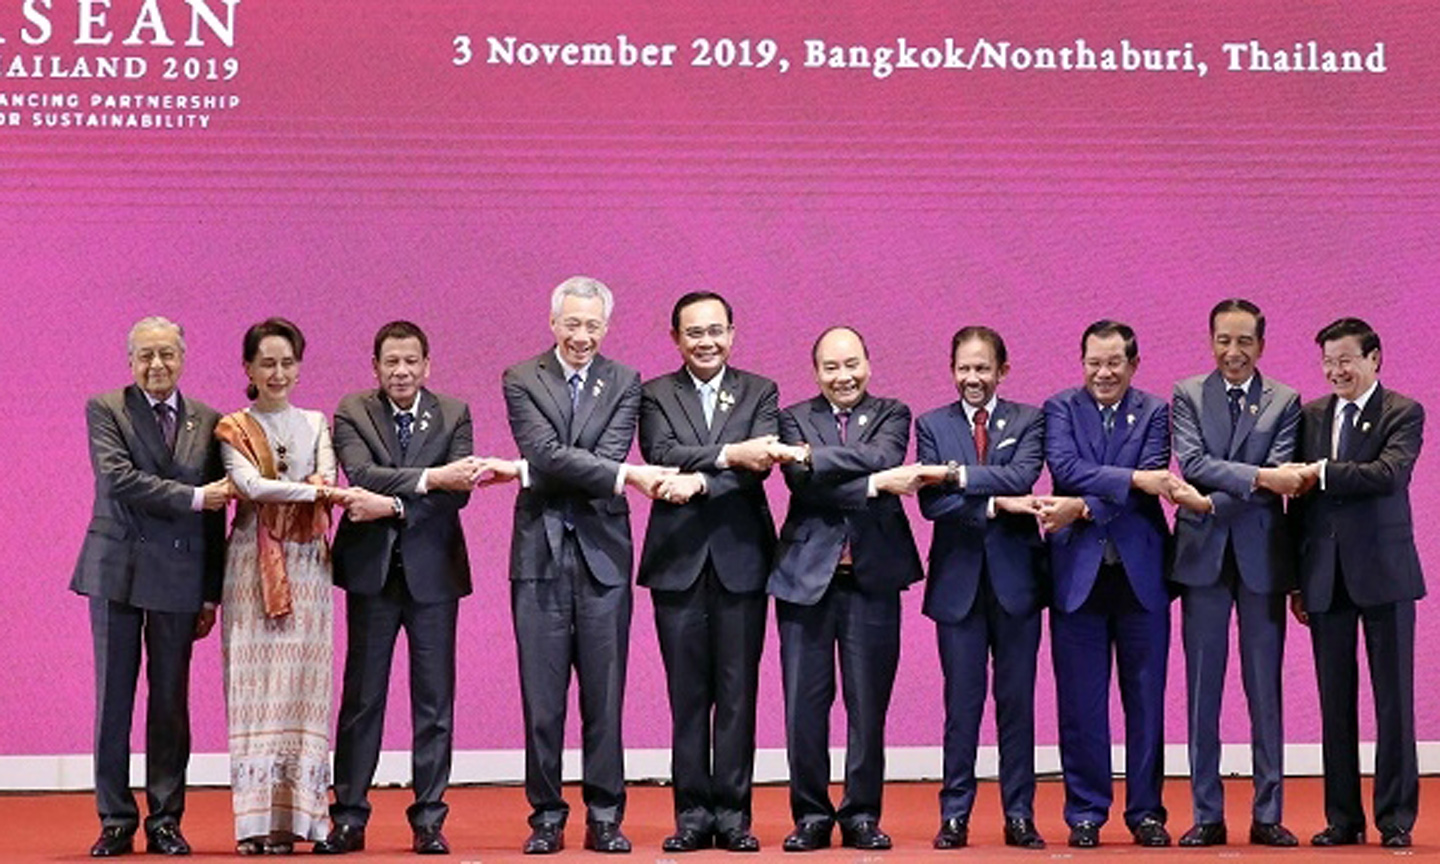 PM Nguyen Xuan Phuc (fifth from right) and ASEAN leaders pose for a photo at the opening ceremony of the 35th ASEAN Summit in Bangkok on November 3. (Photo: VNA)